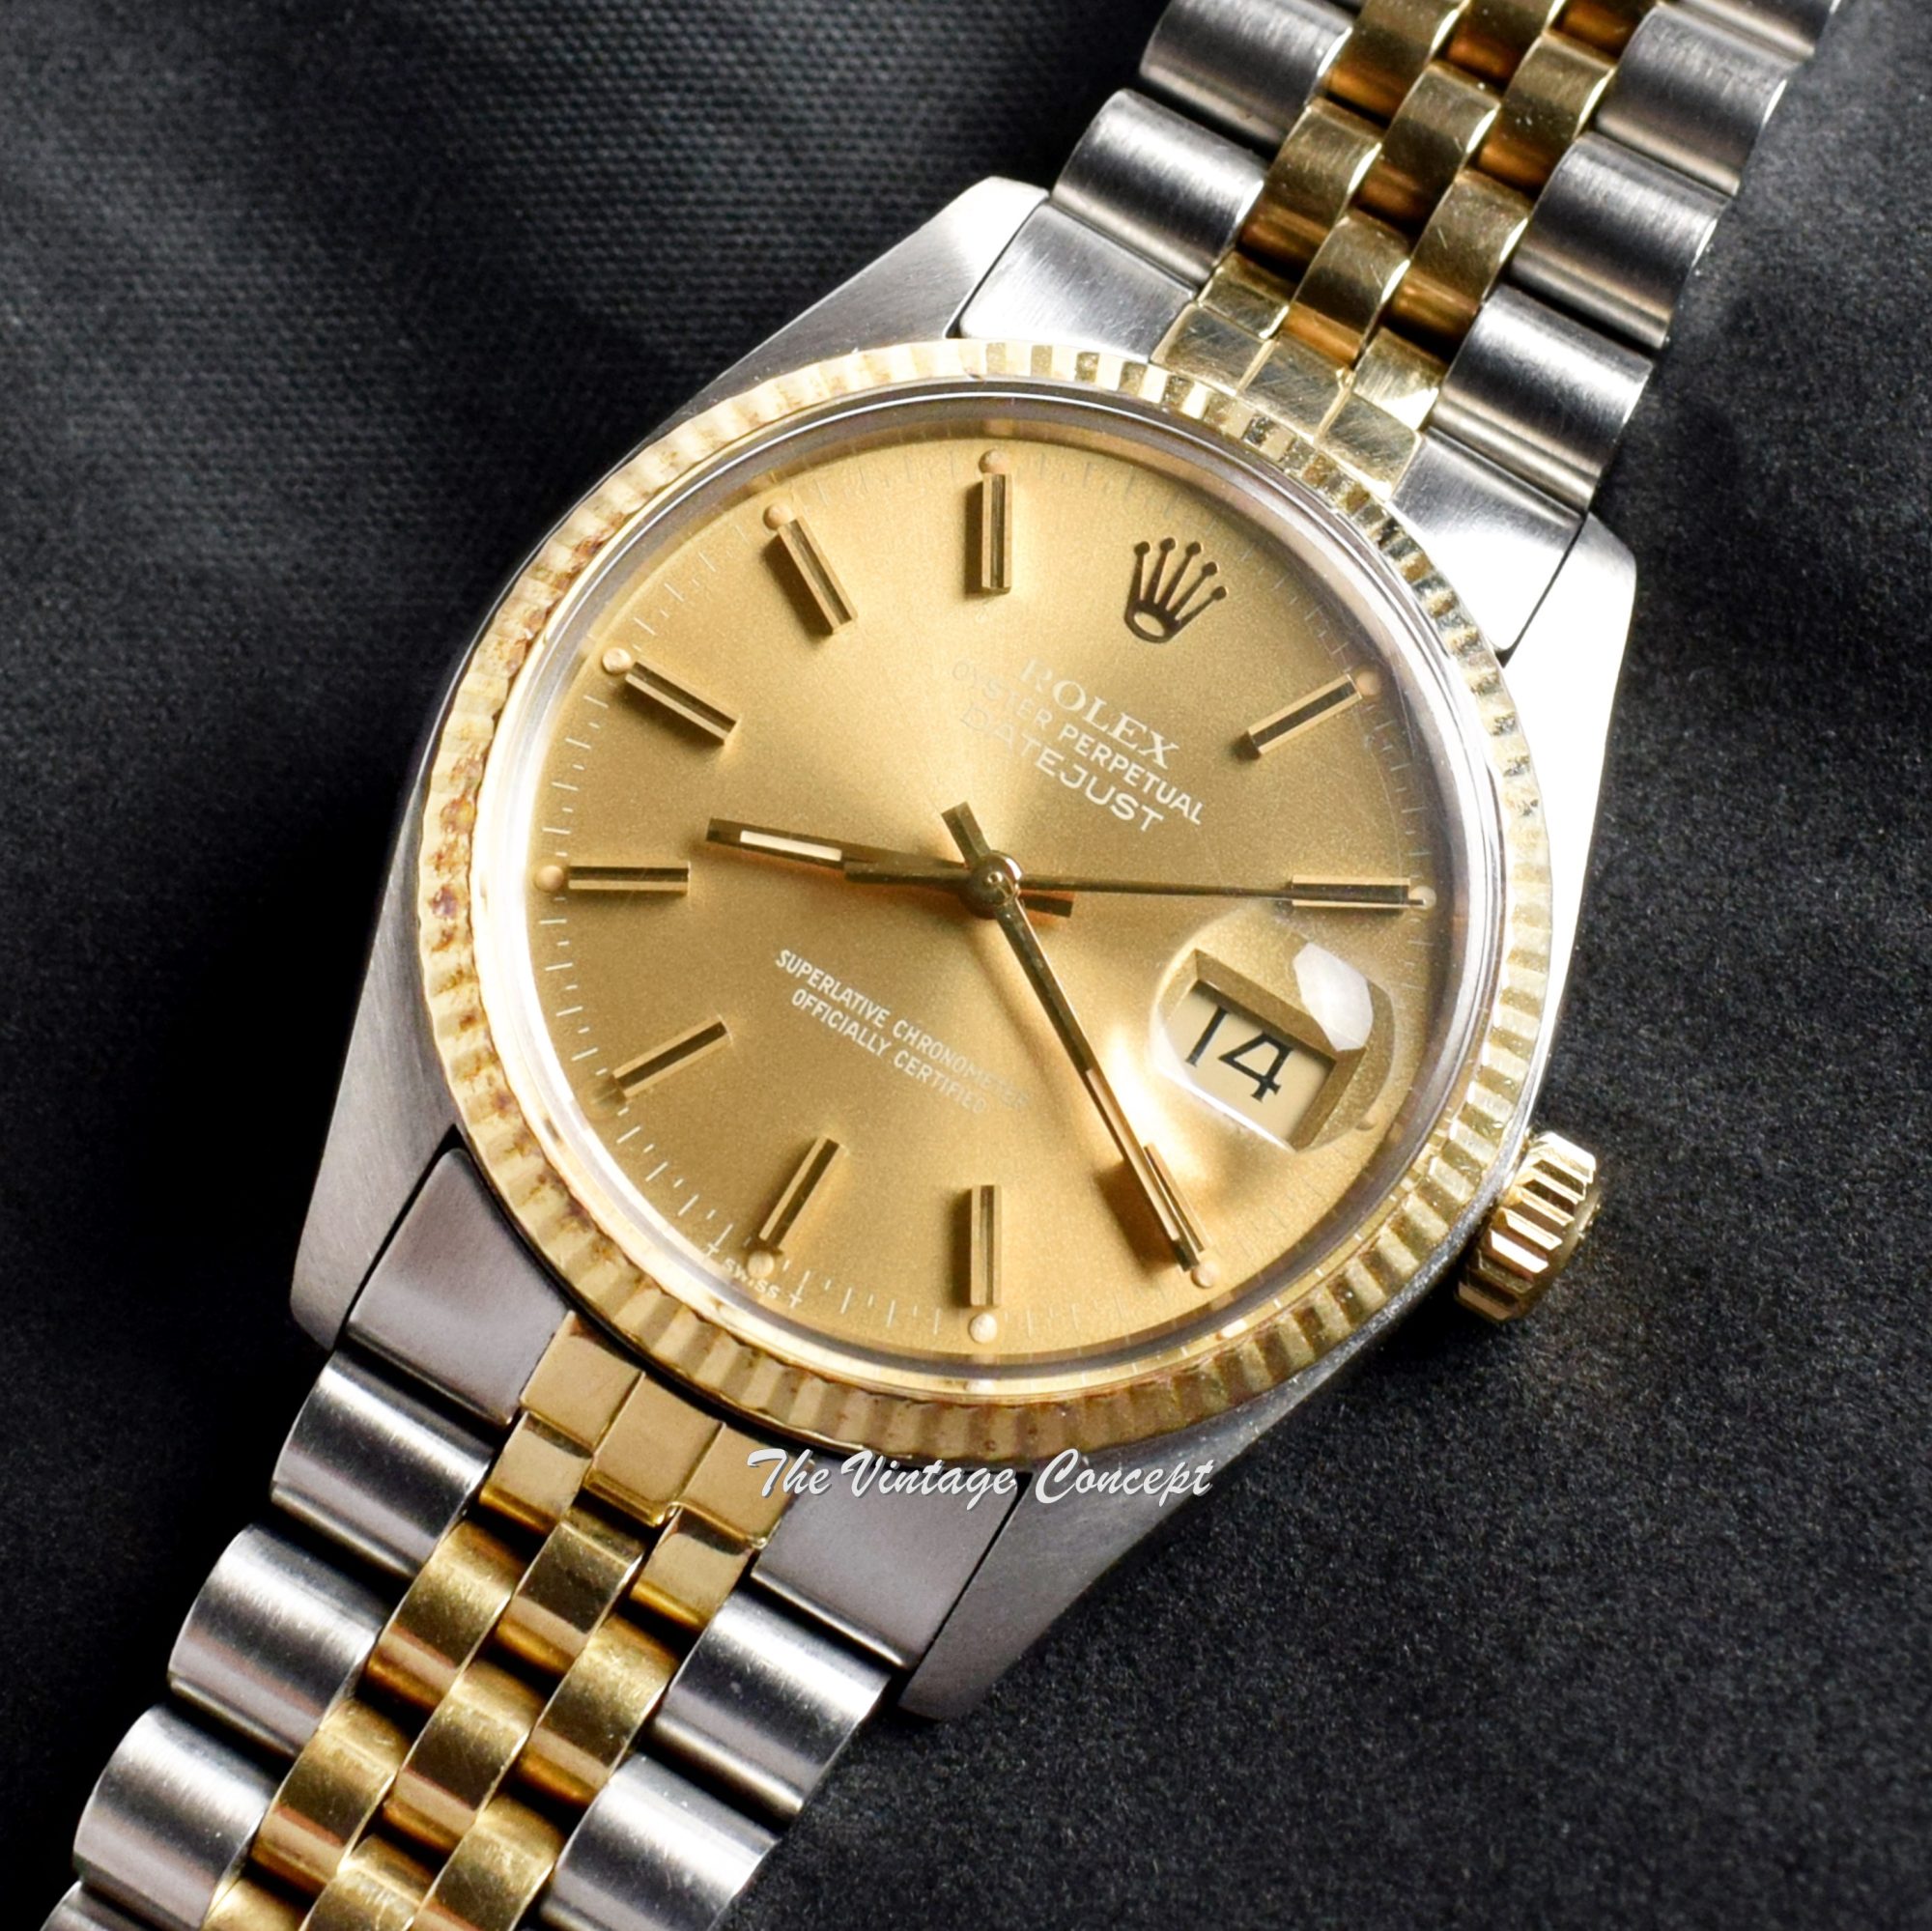 Rolex Datejust Yellow Gold & Steel Gold Champagne Dial 16013 w/ Original Papers (SOLD) - The Vintage Concept